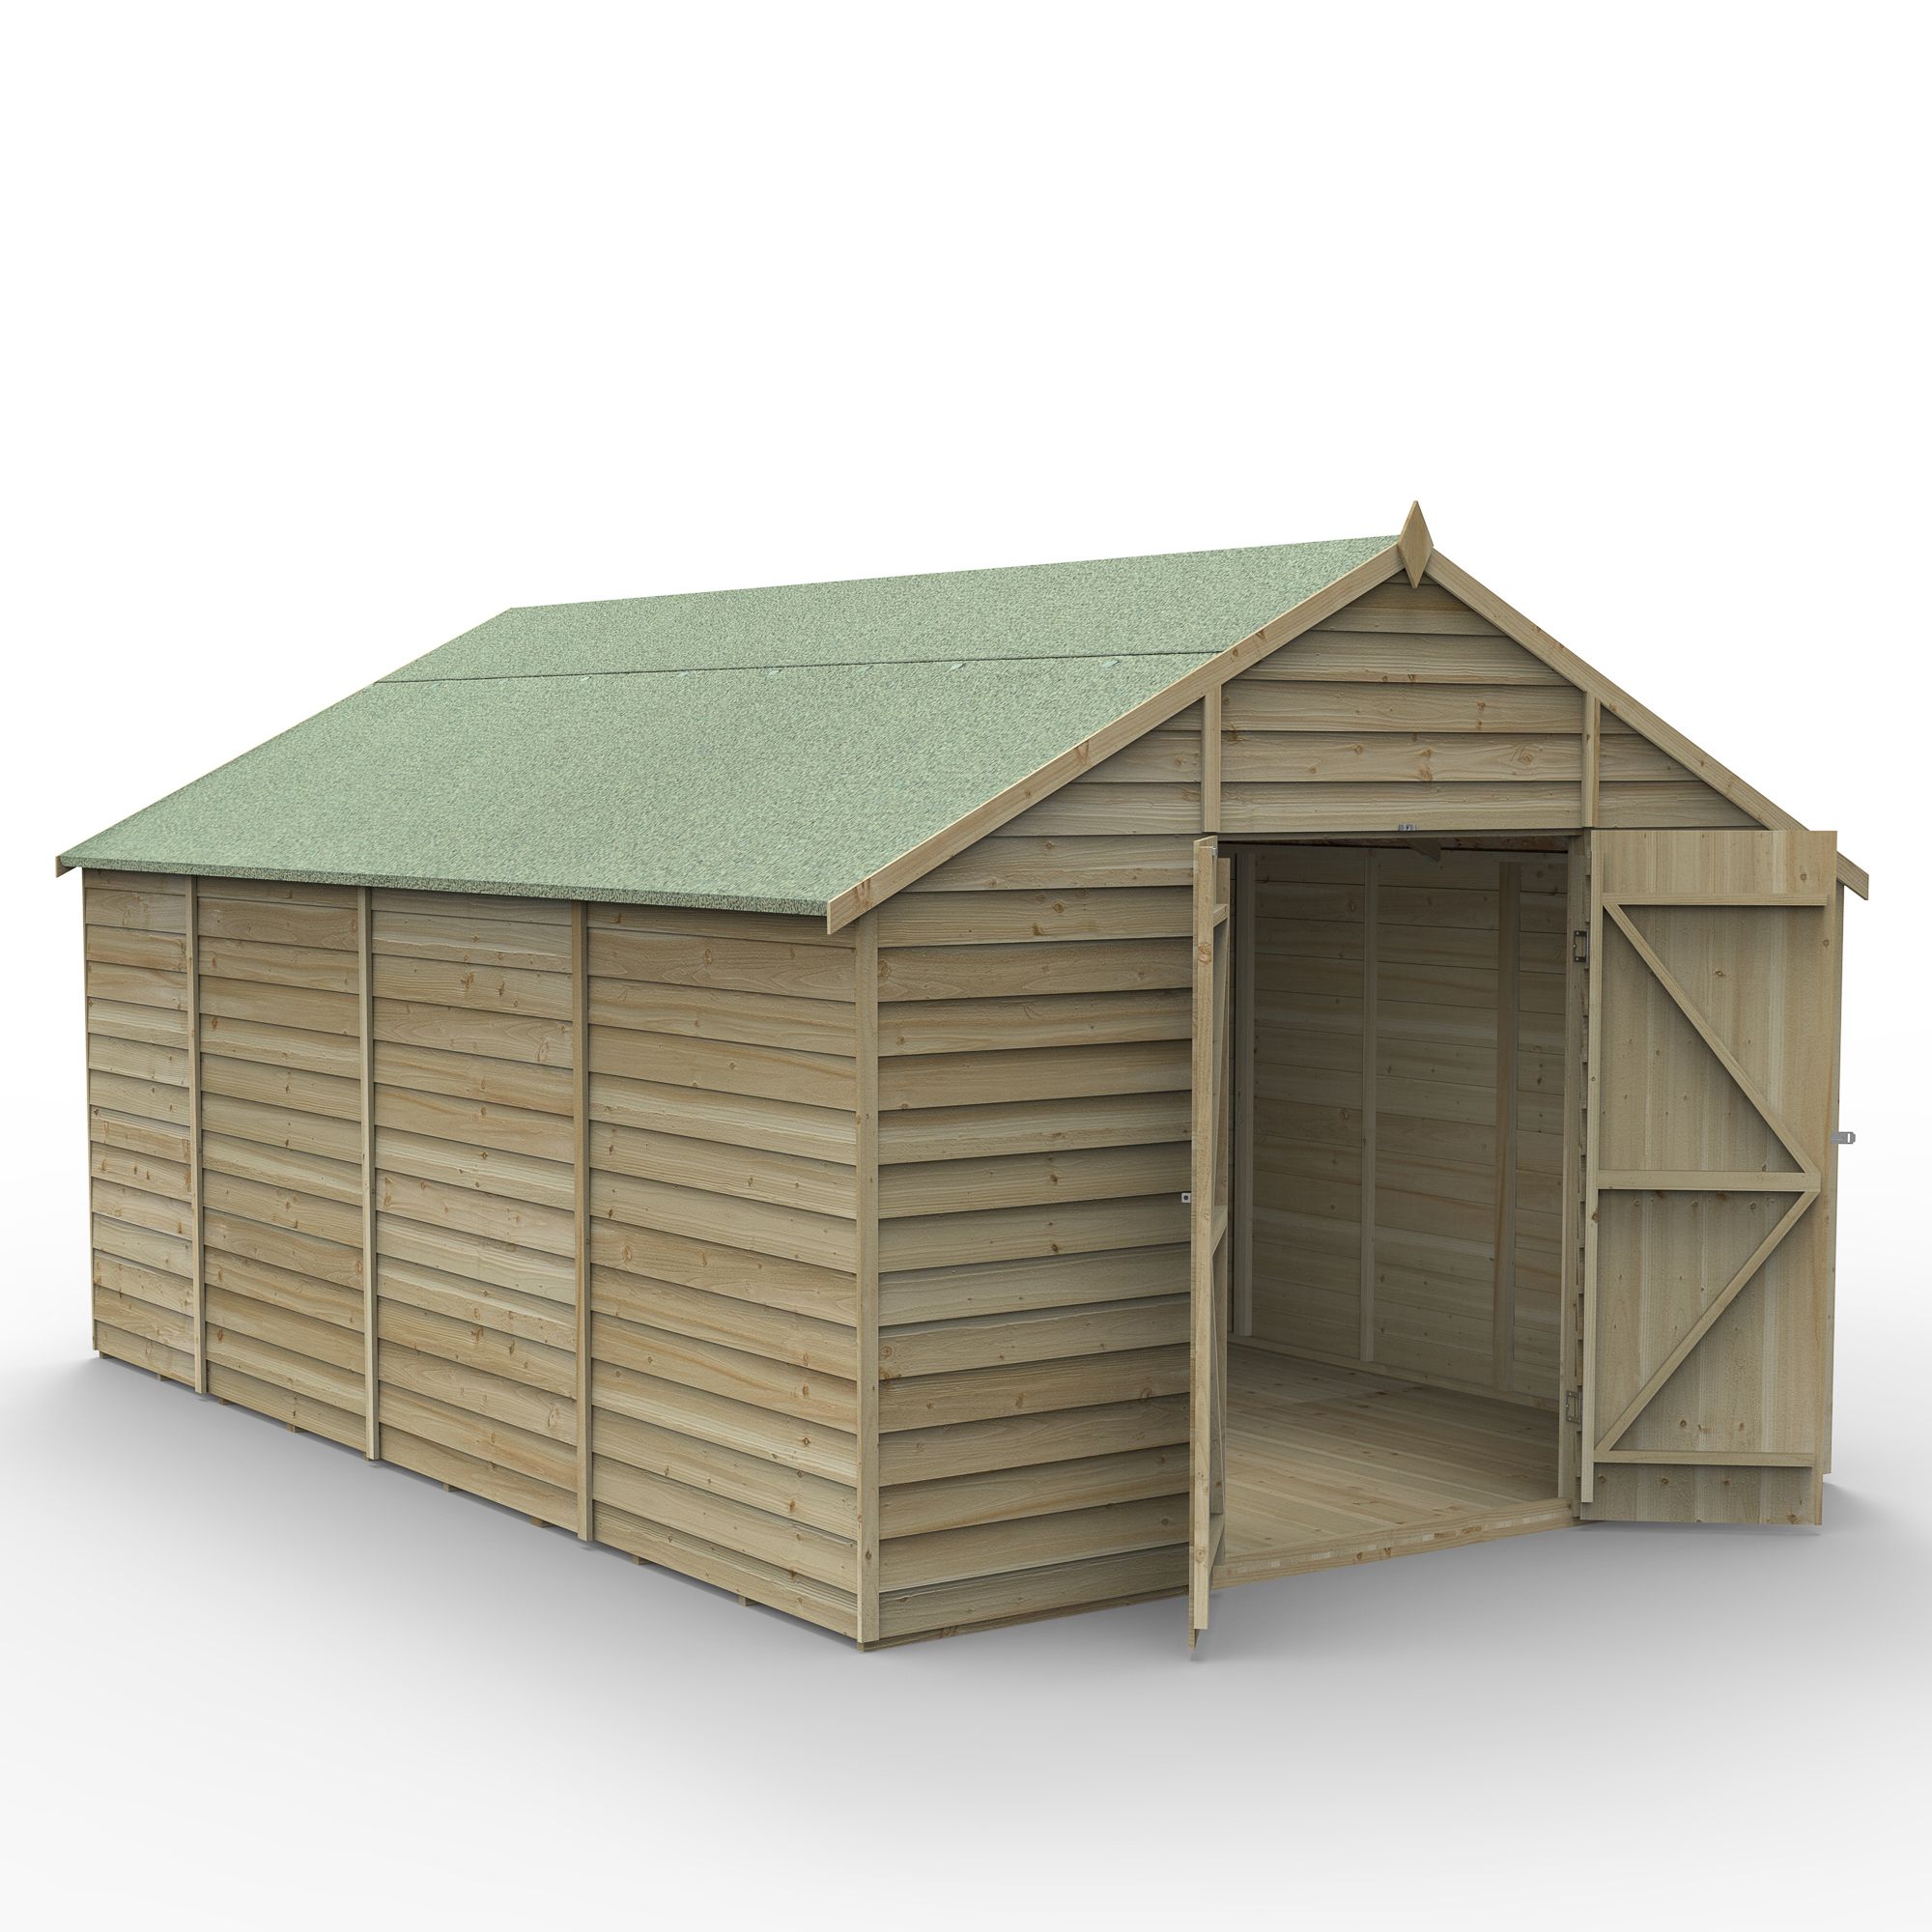 Forest Garden Overlap 10x15 ft Apex Wooden 2 door Shed with floor (Base included) - Assembly service included